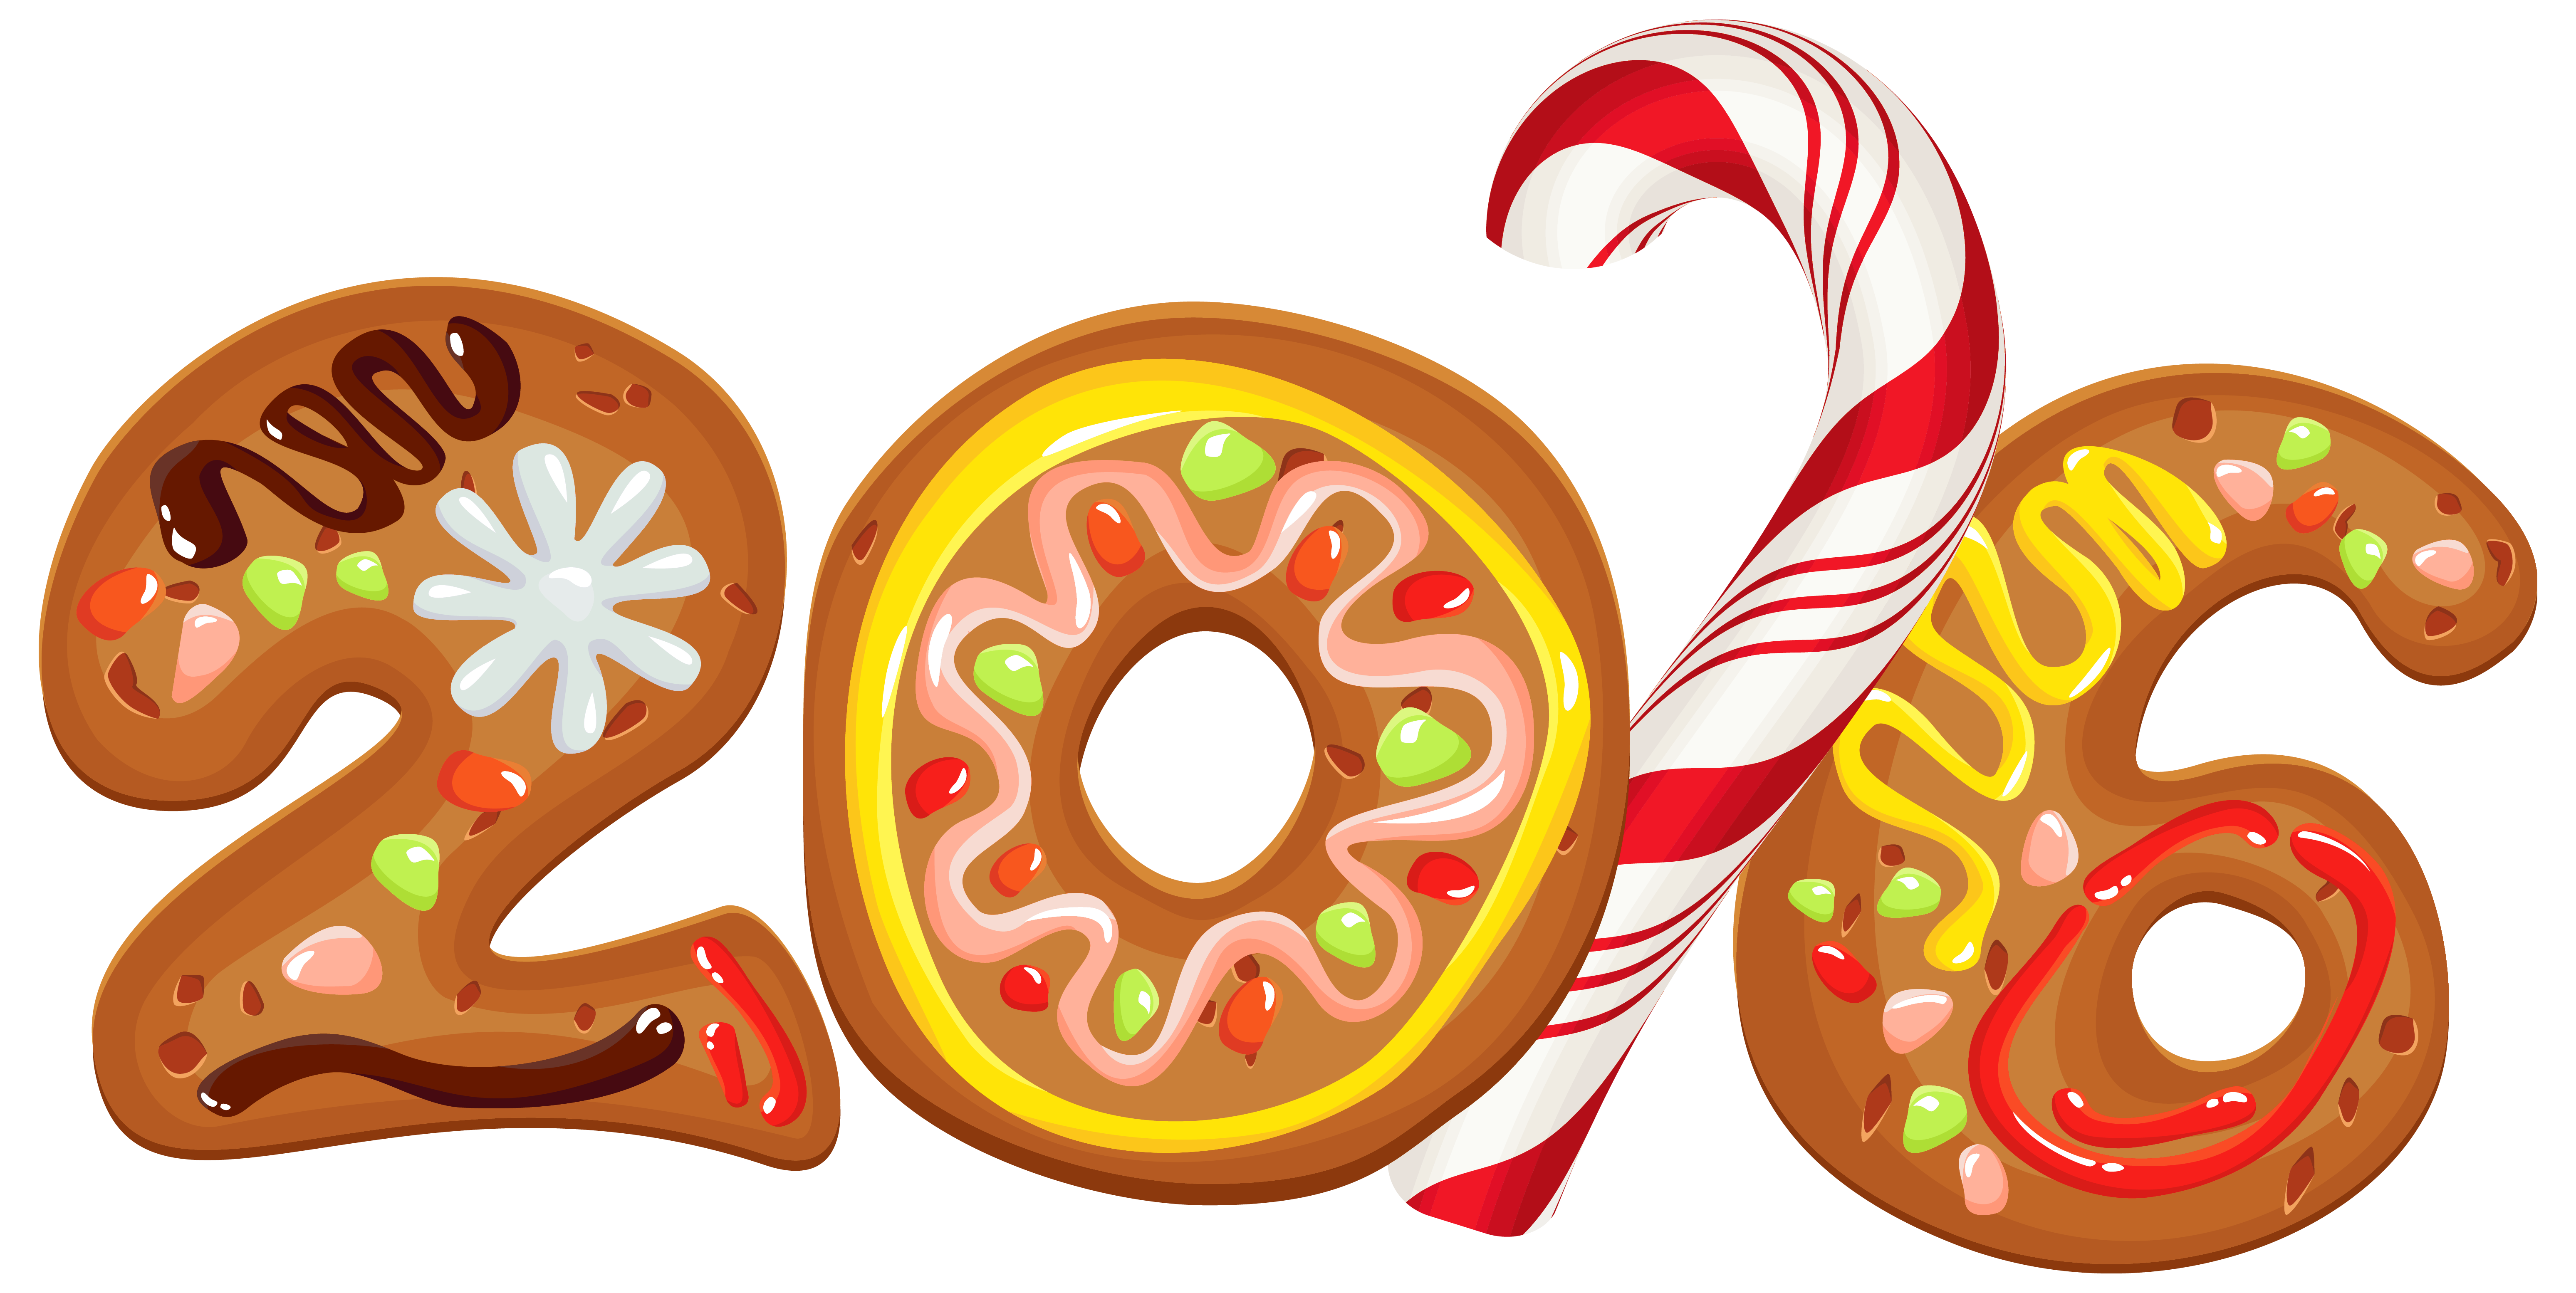 foods clipart cookie